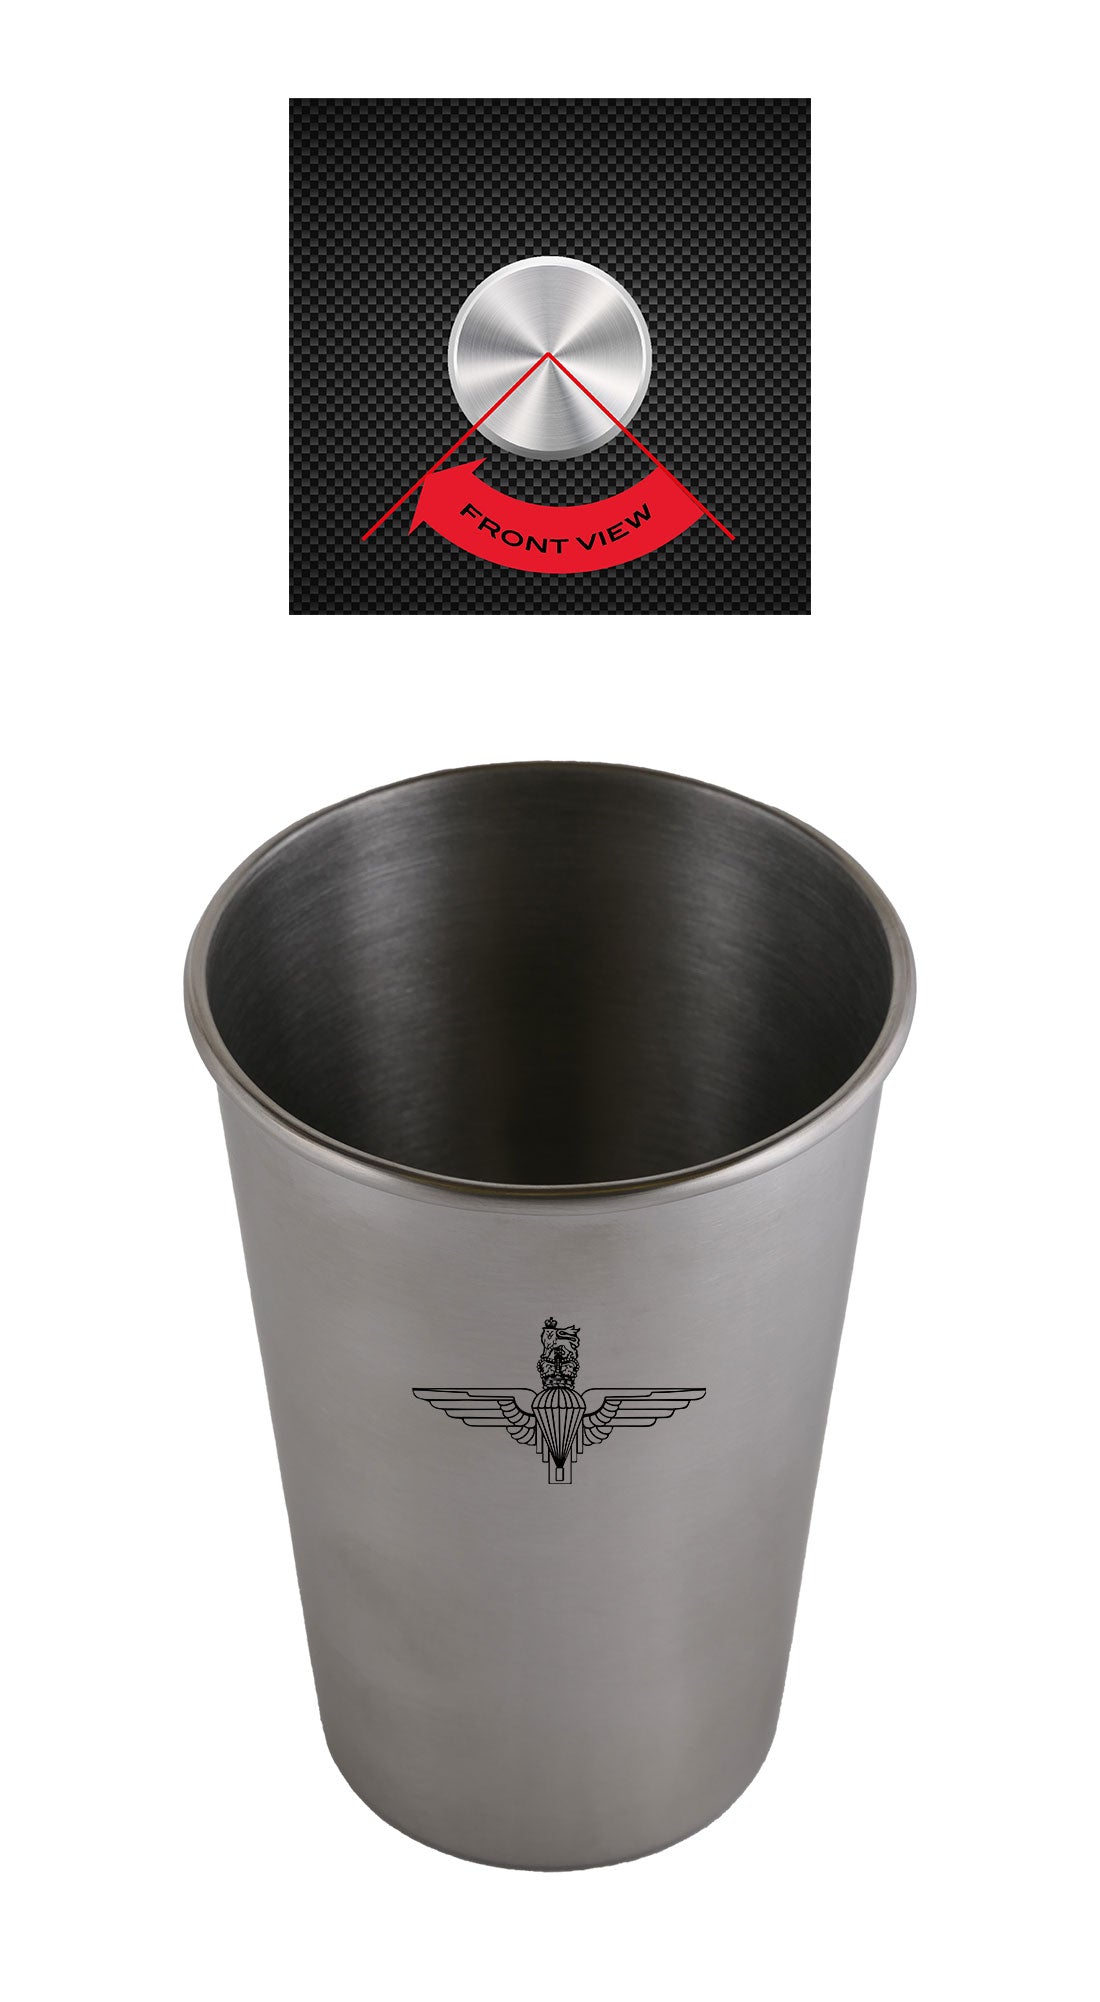 Parachute Regiment - Stainless Steel Cup - Customisable - Steel